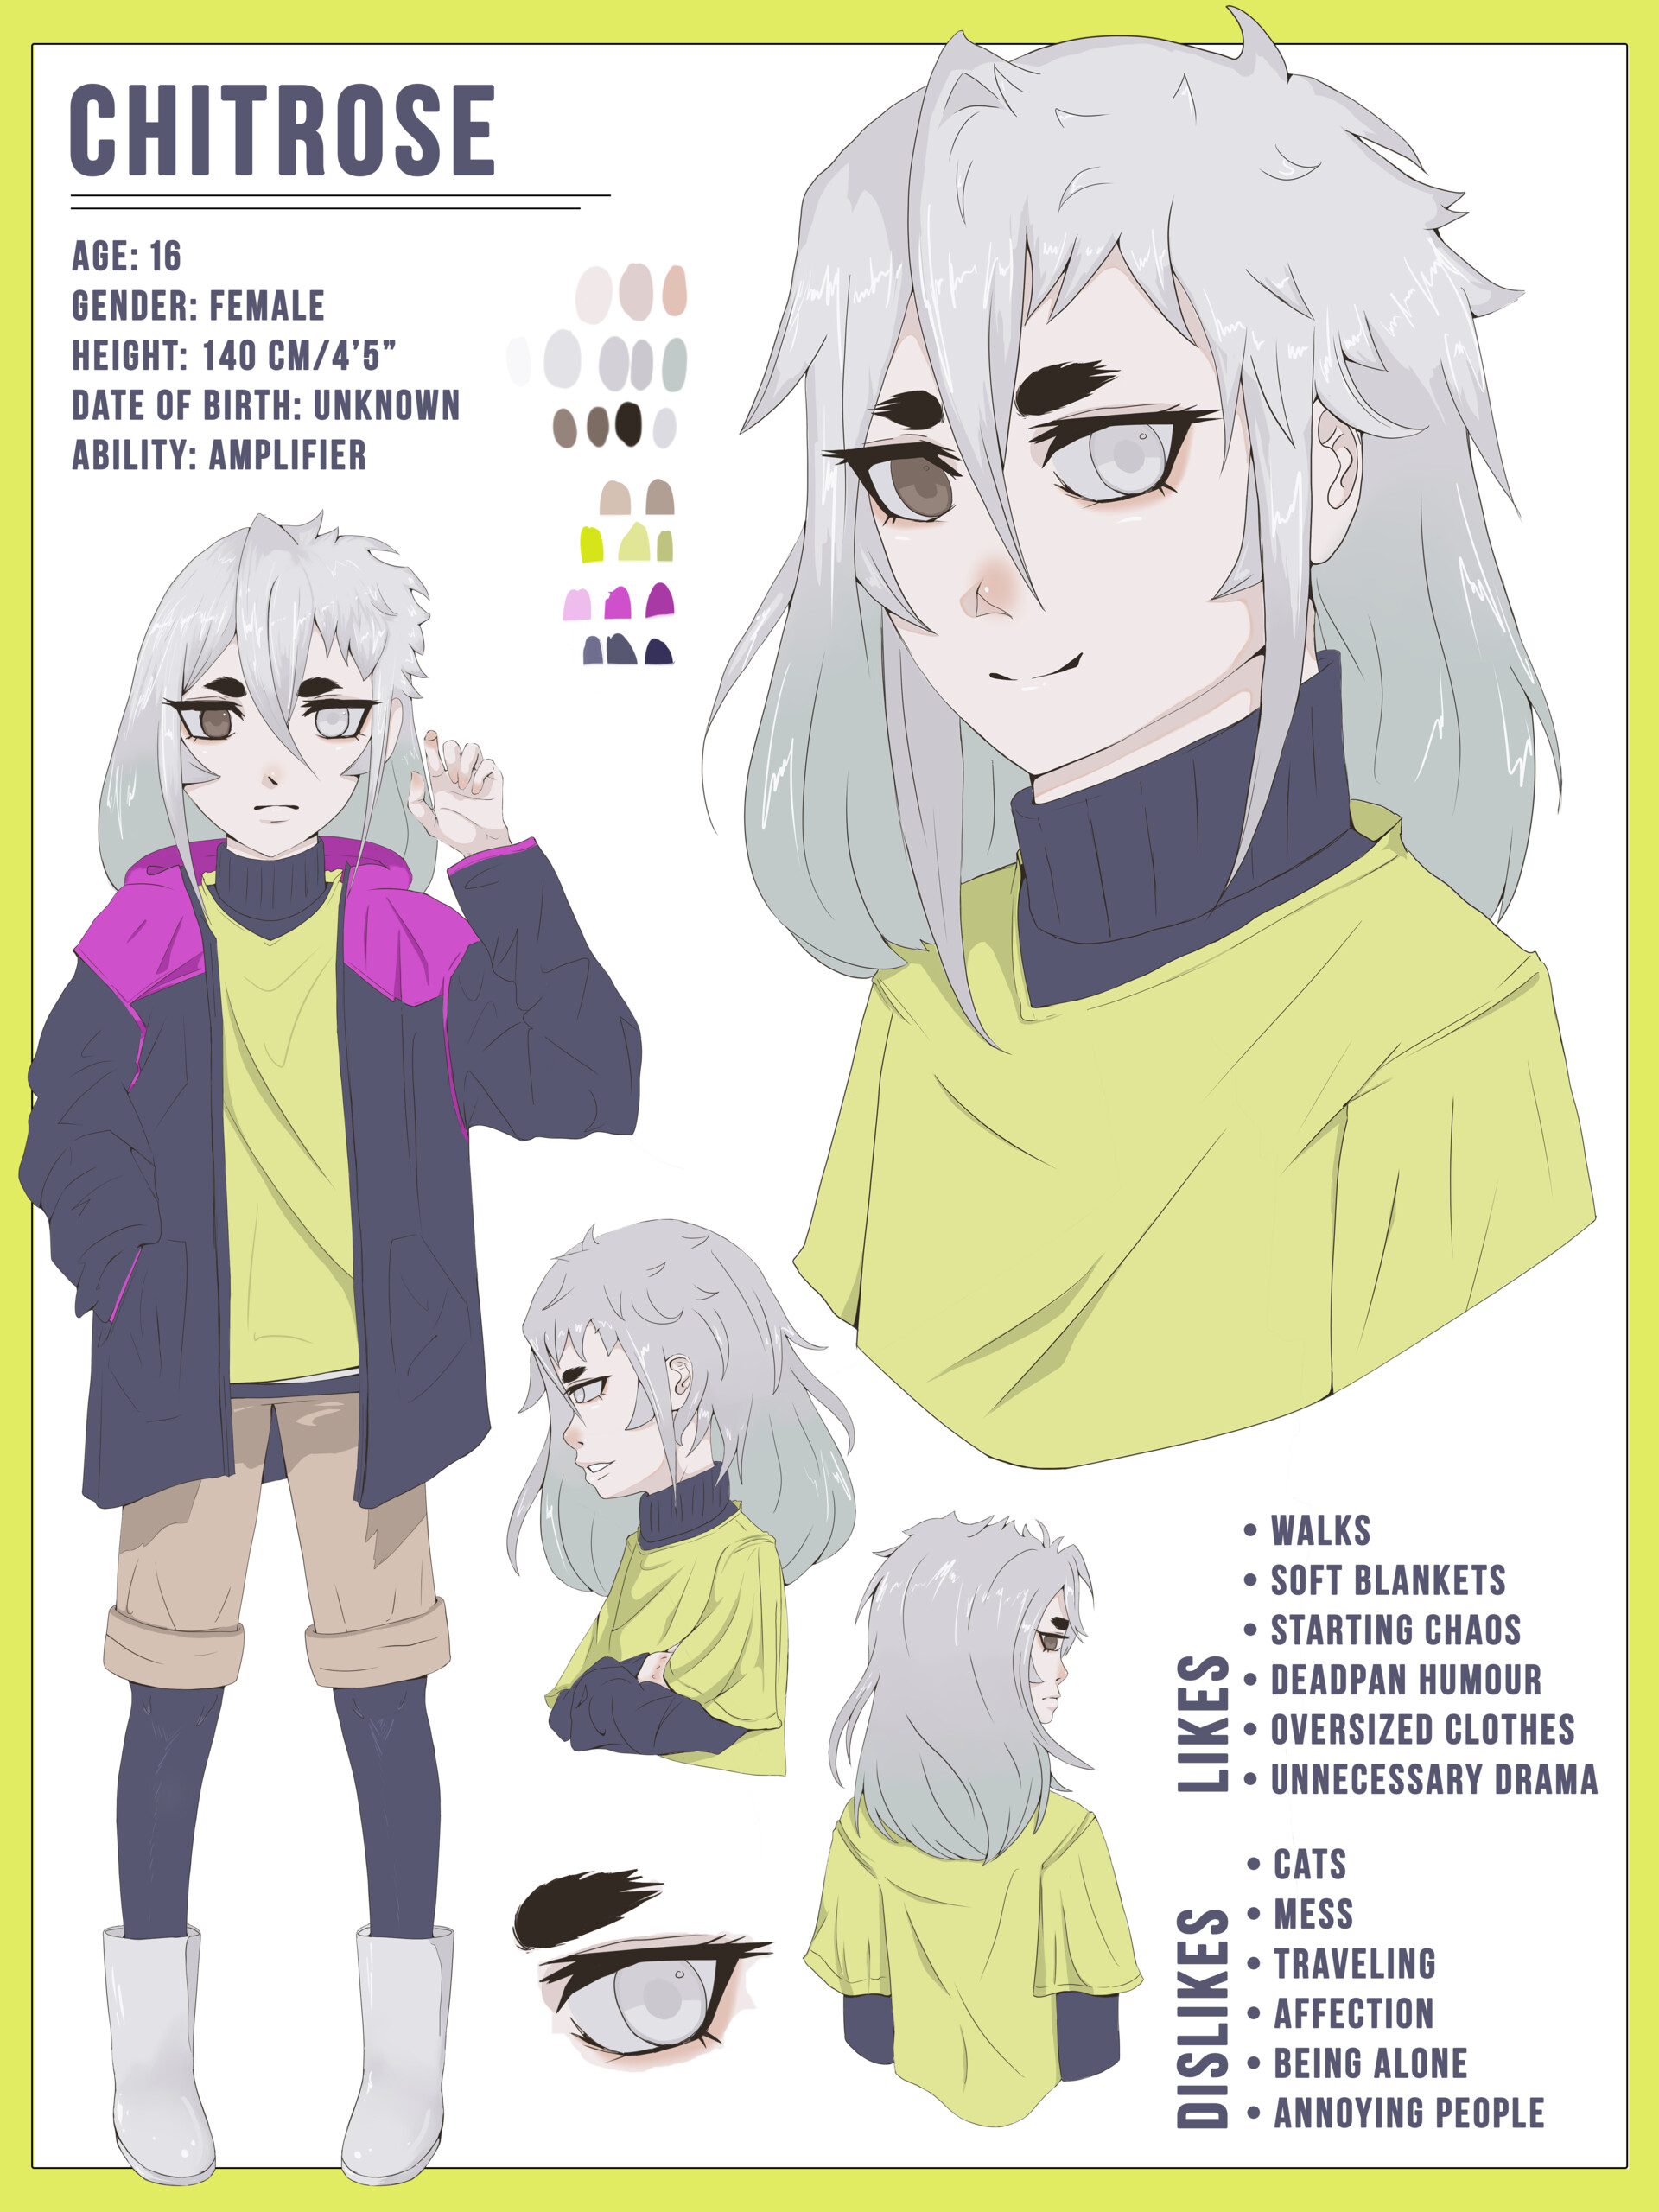 character reference sheet for リキriki N I N A R I N O    Illustrations  ART street